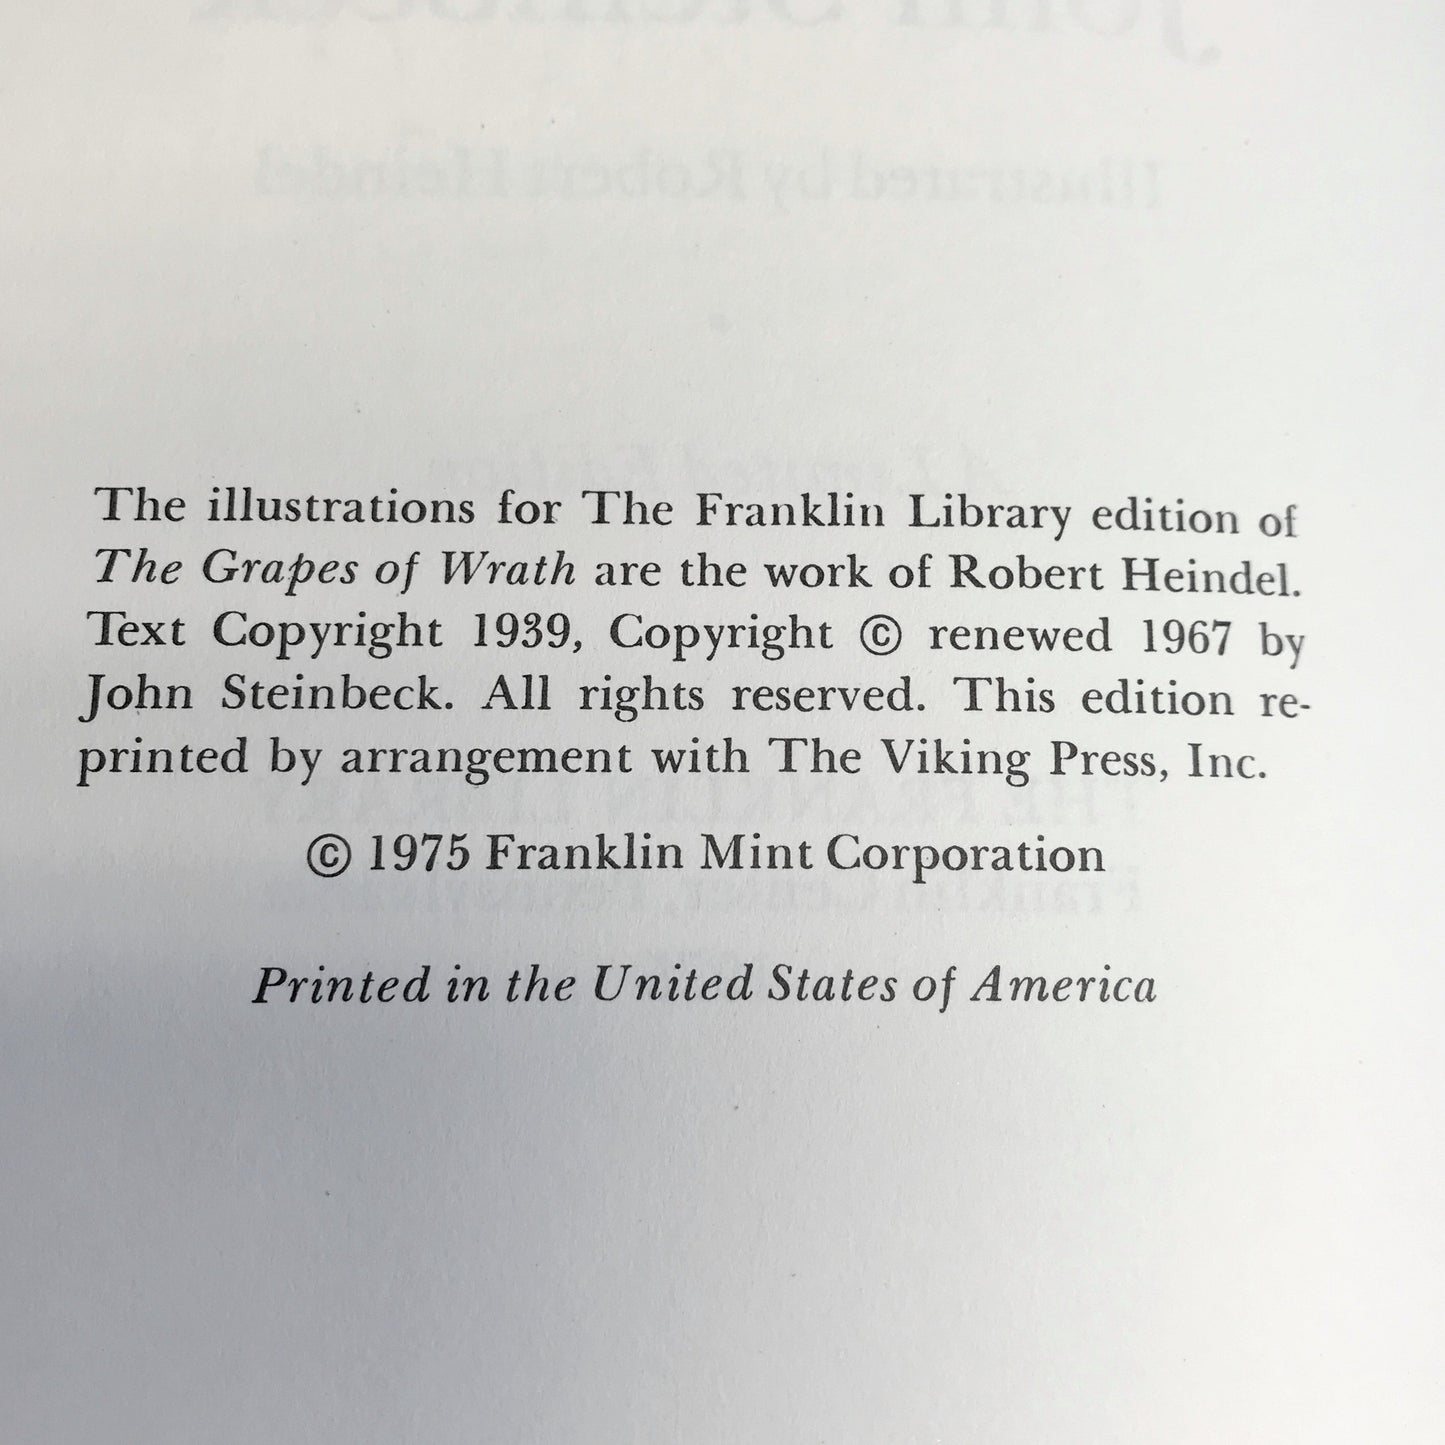 The Grapes of Wrath - John Steinbeck - Franklin Library - 1975